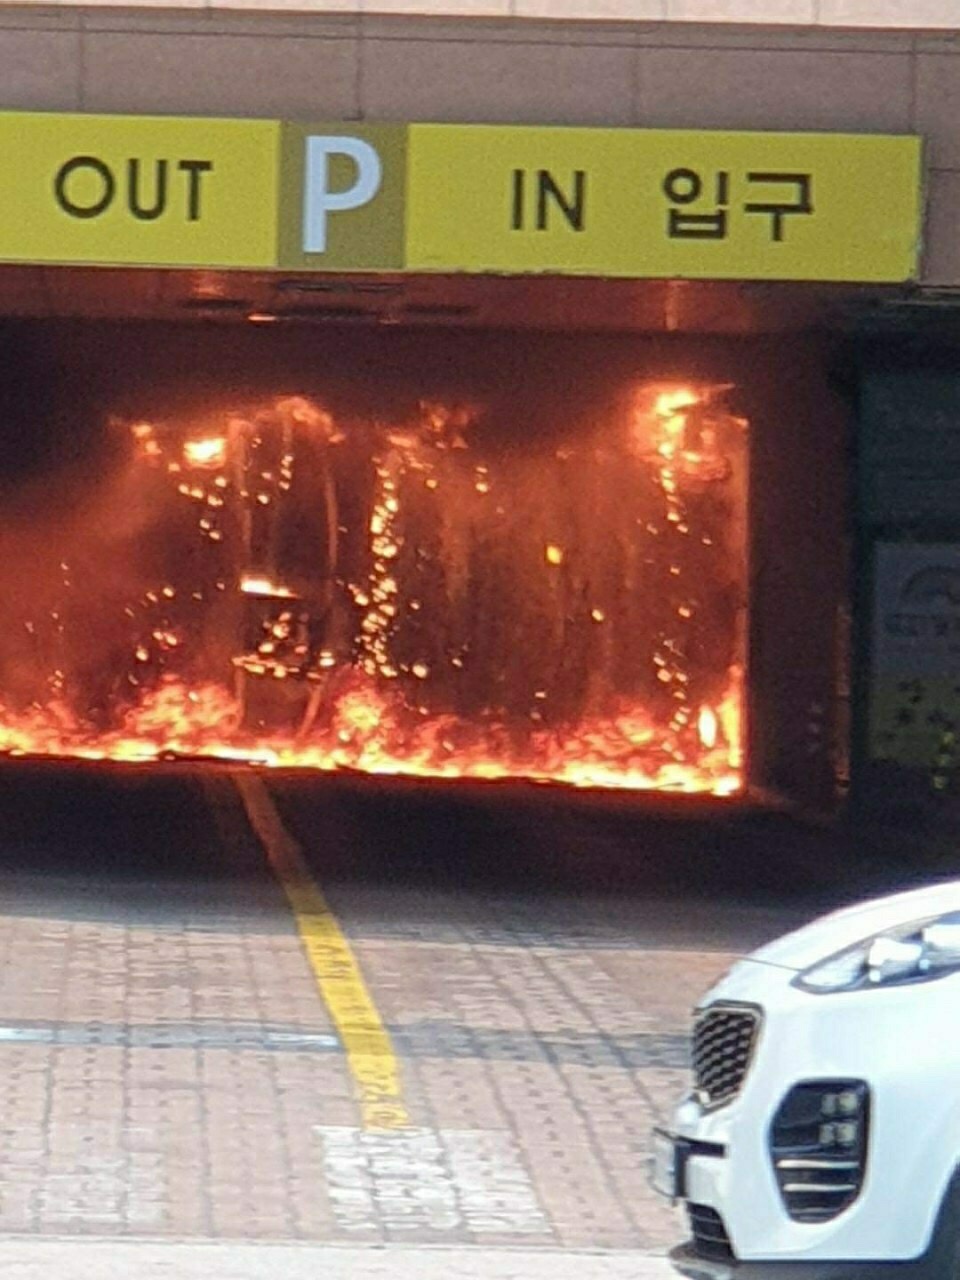 The Donong E-Mart is on fire.